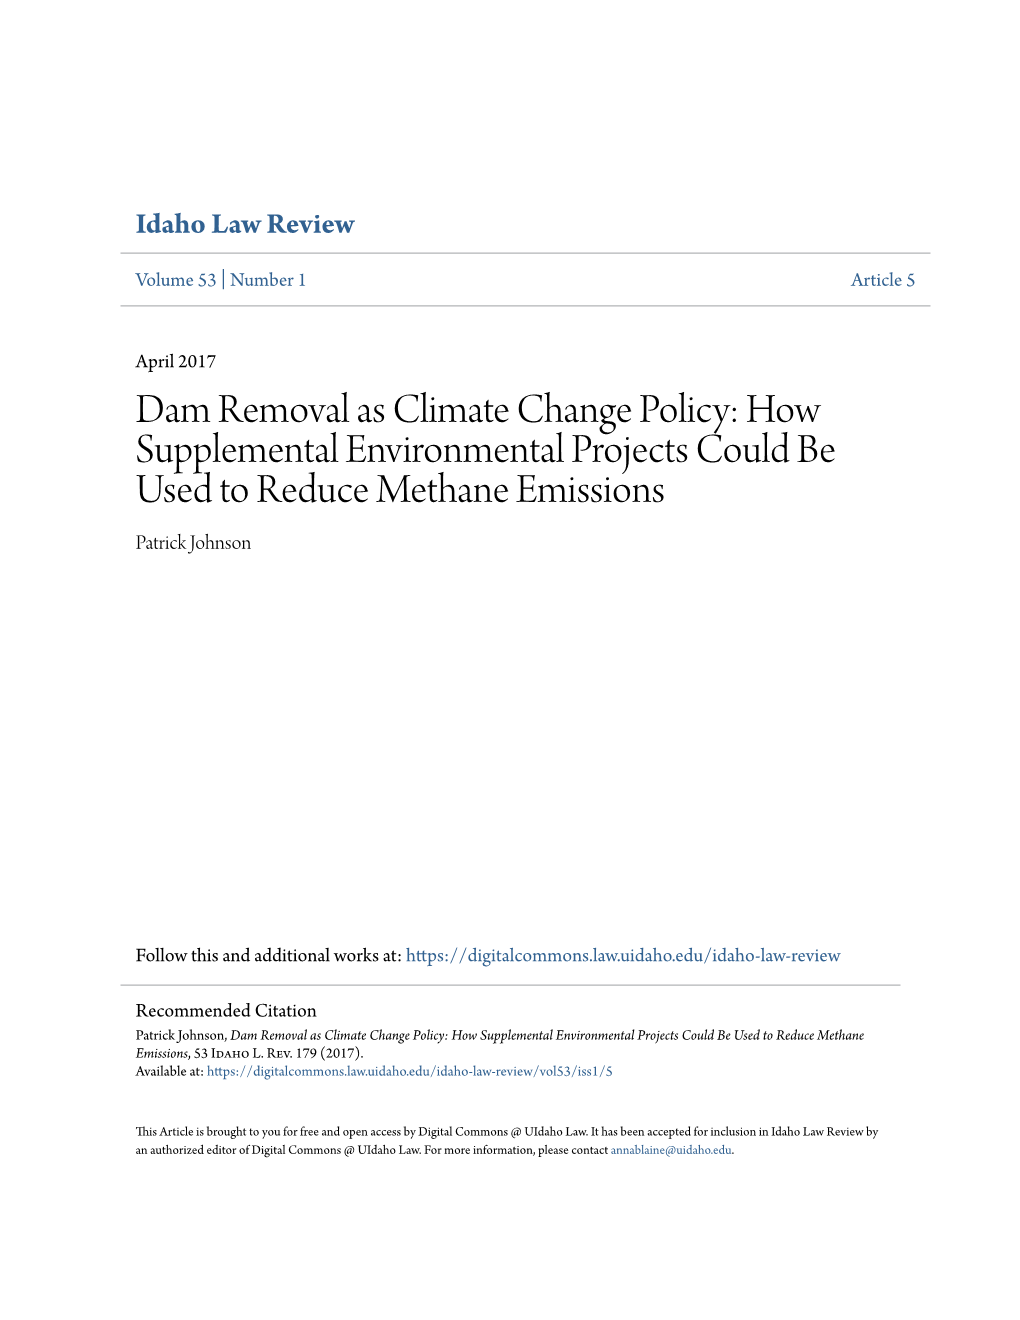 Dam Removal As Climate Change Policy: How Supplemental Environmental Projects Could Be Used to Reduce Methane Emissions Patrick Johnson